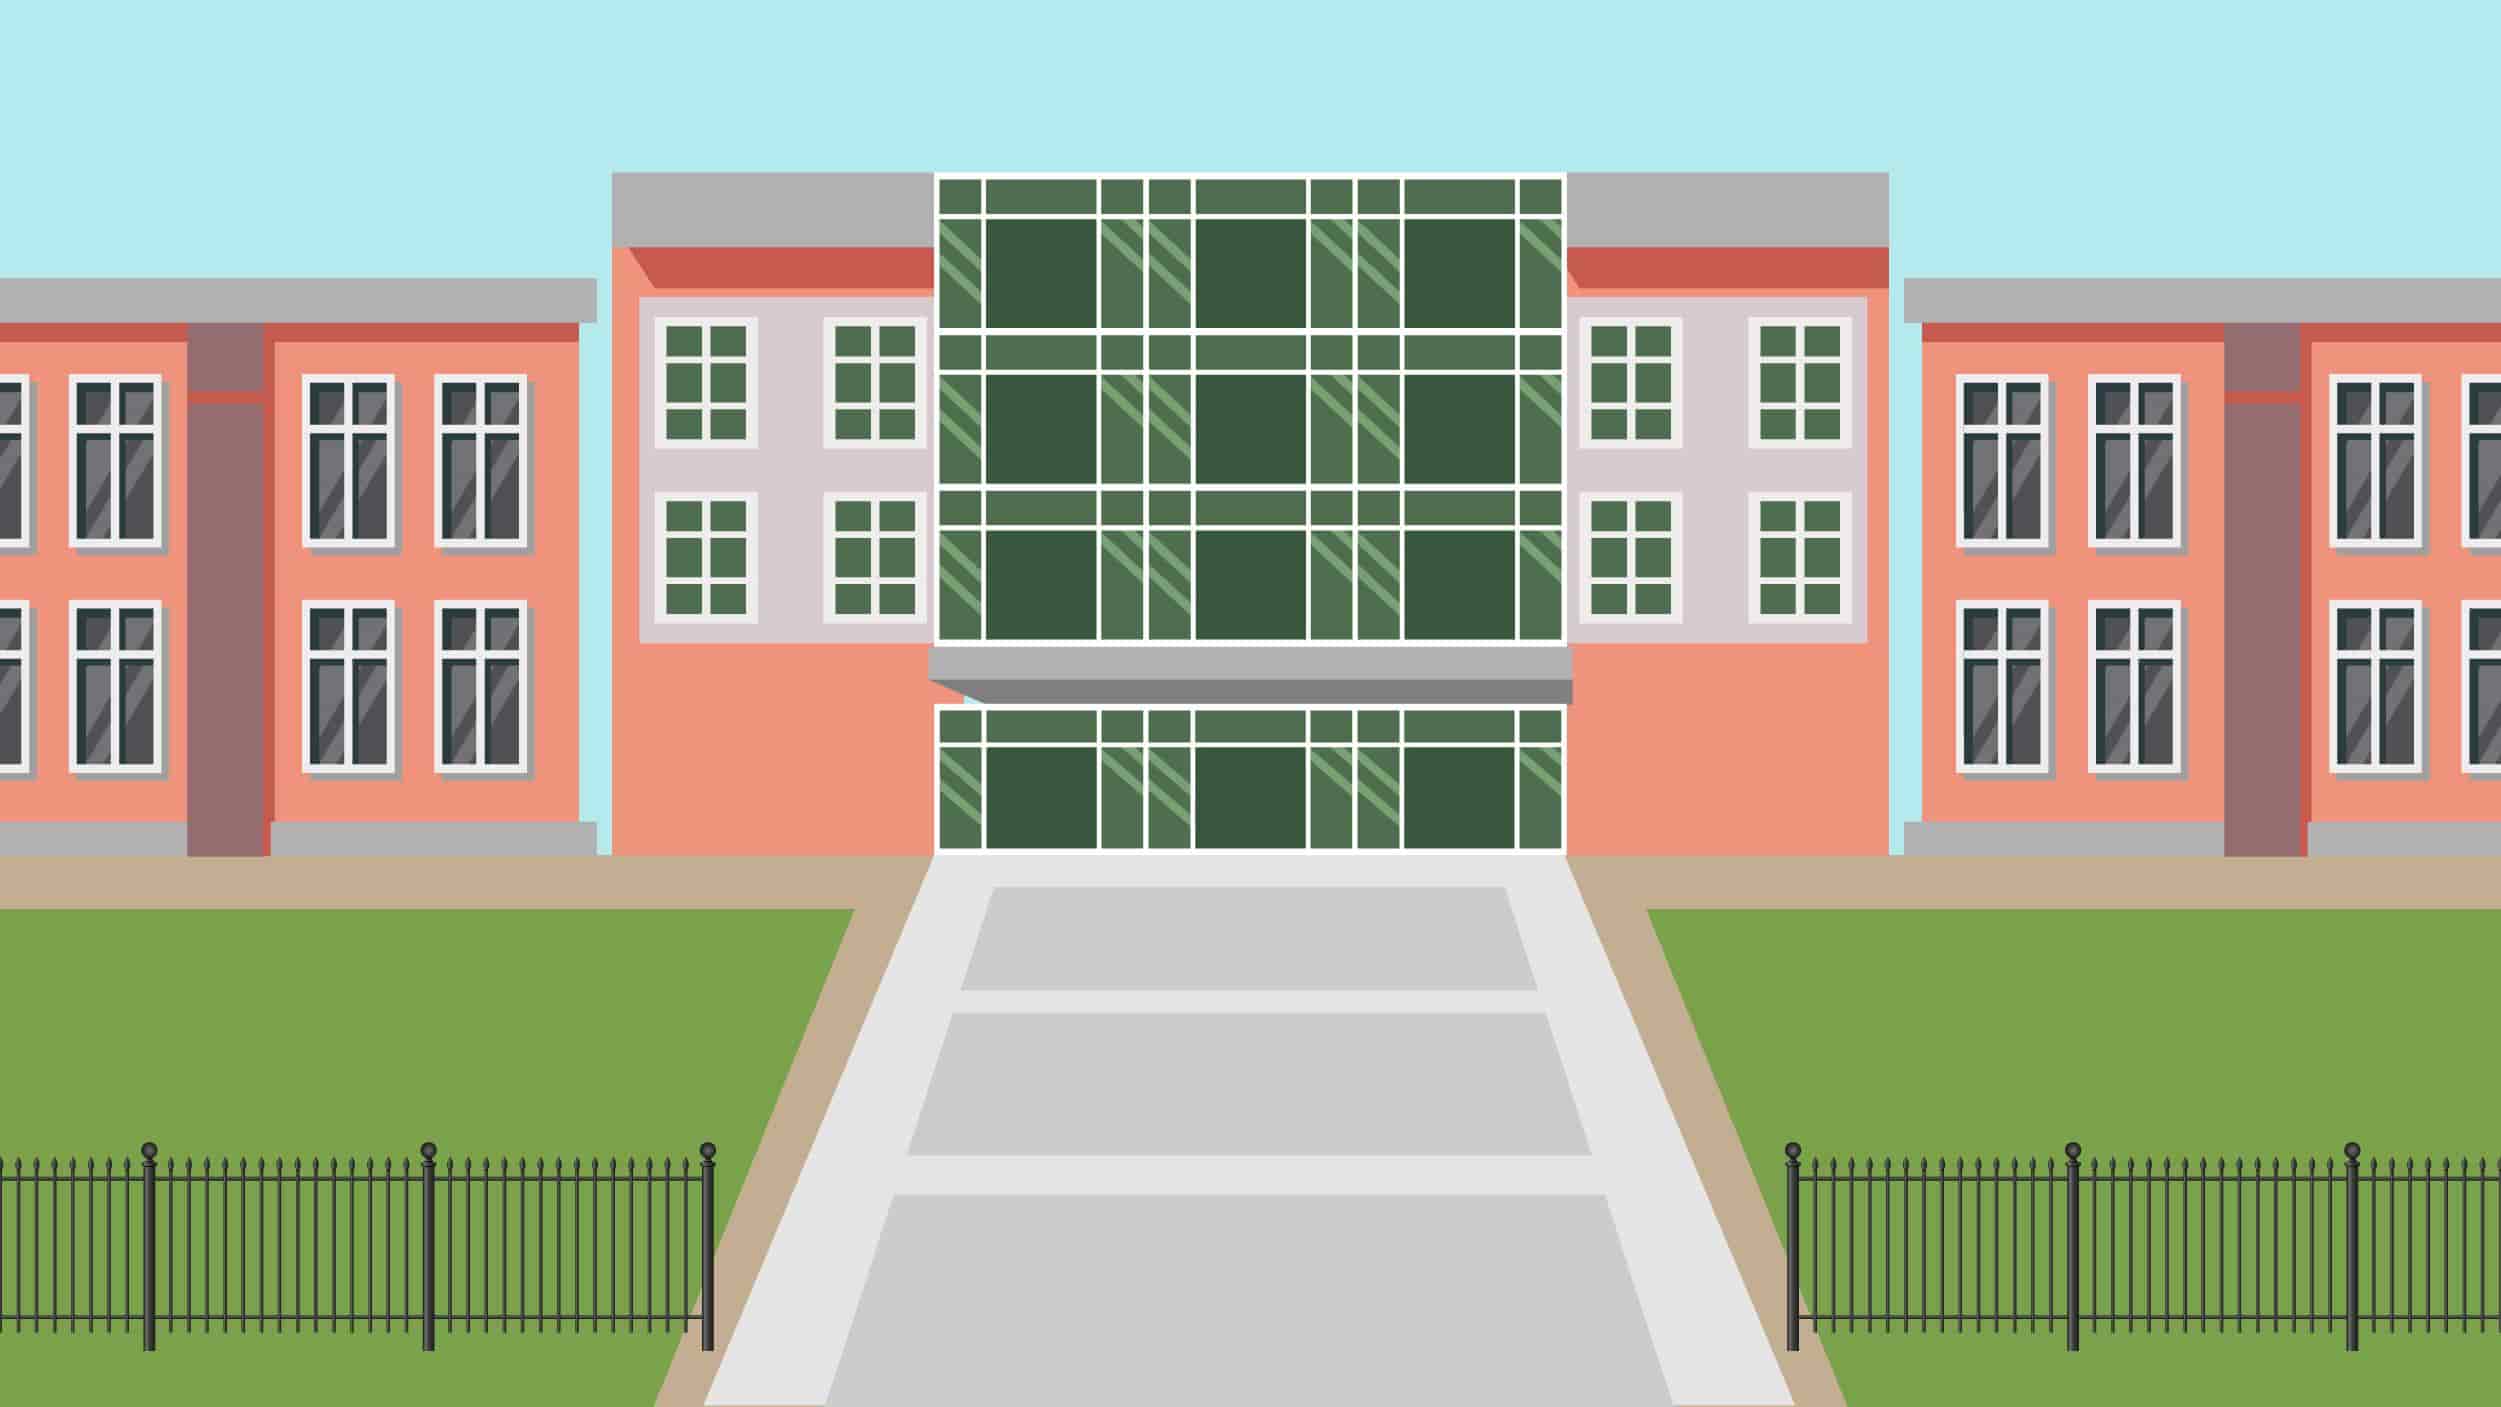 An illustration of a residential hall.